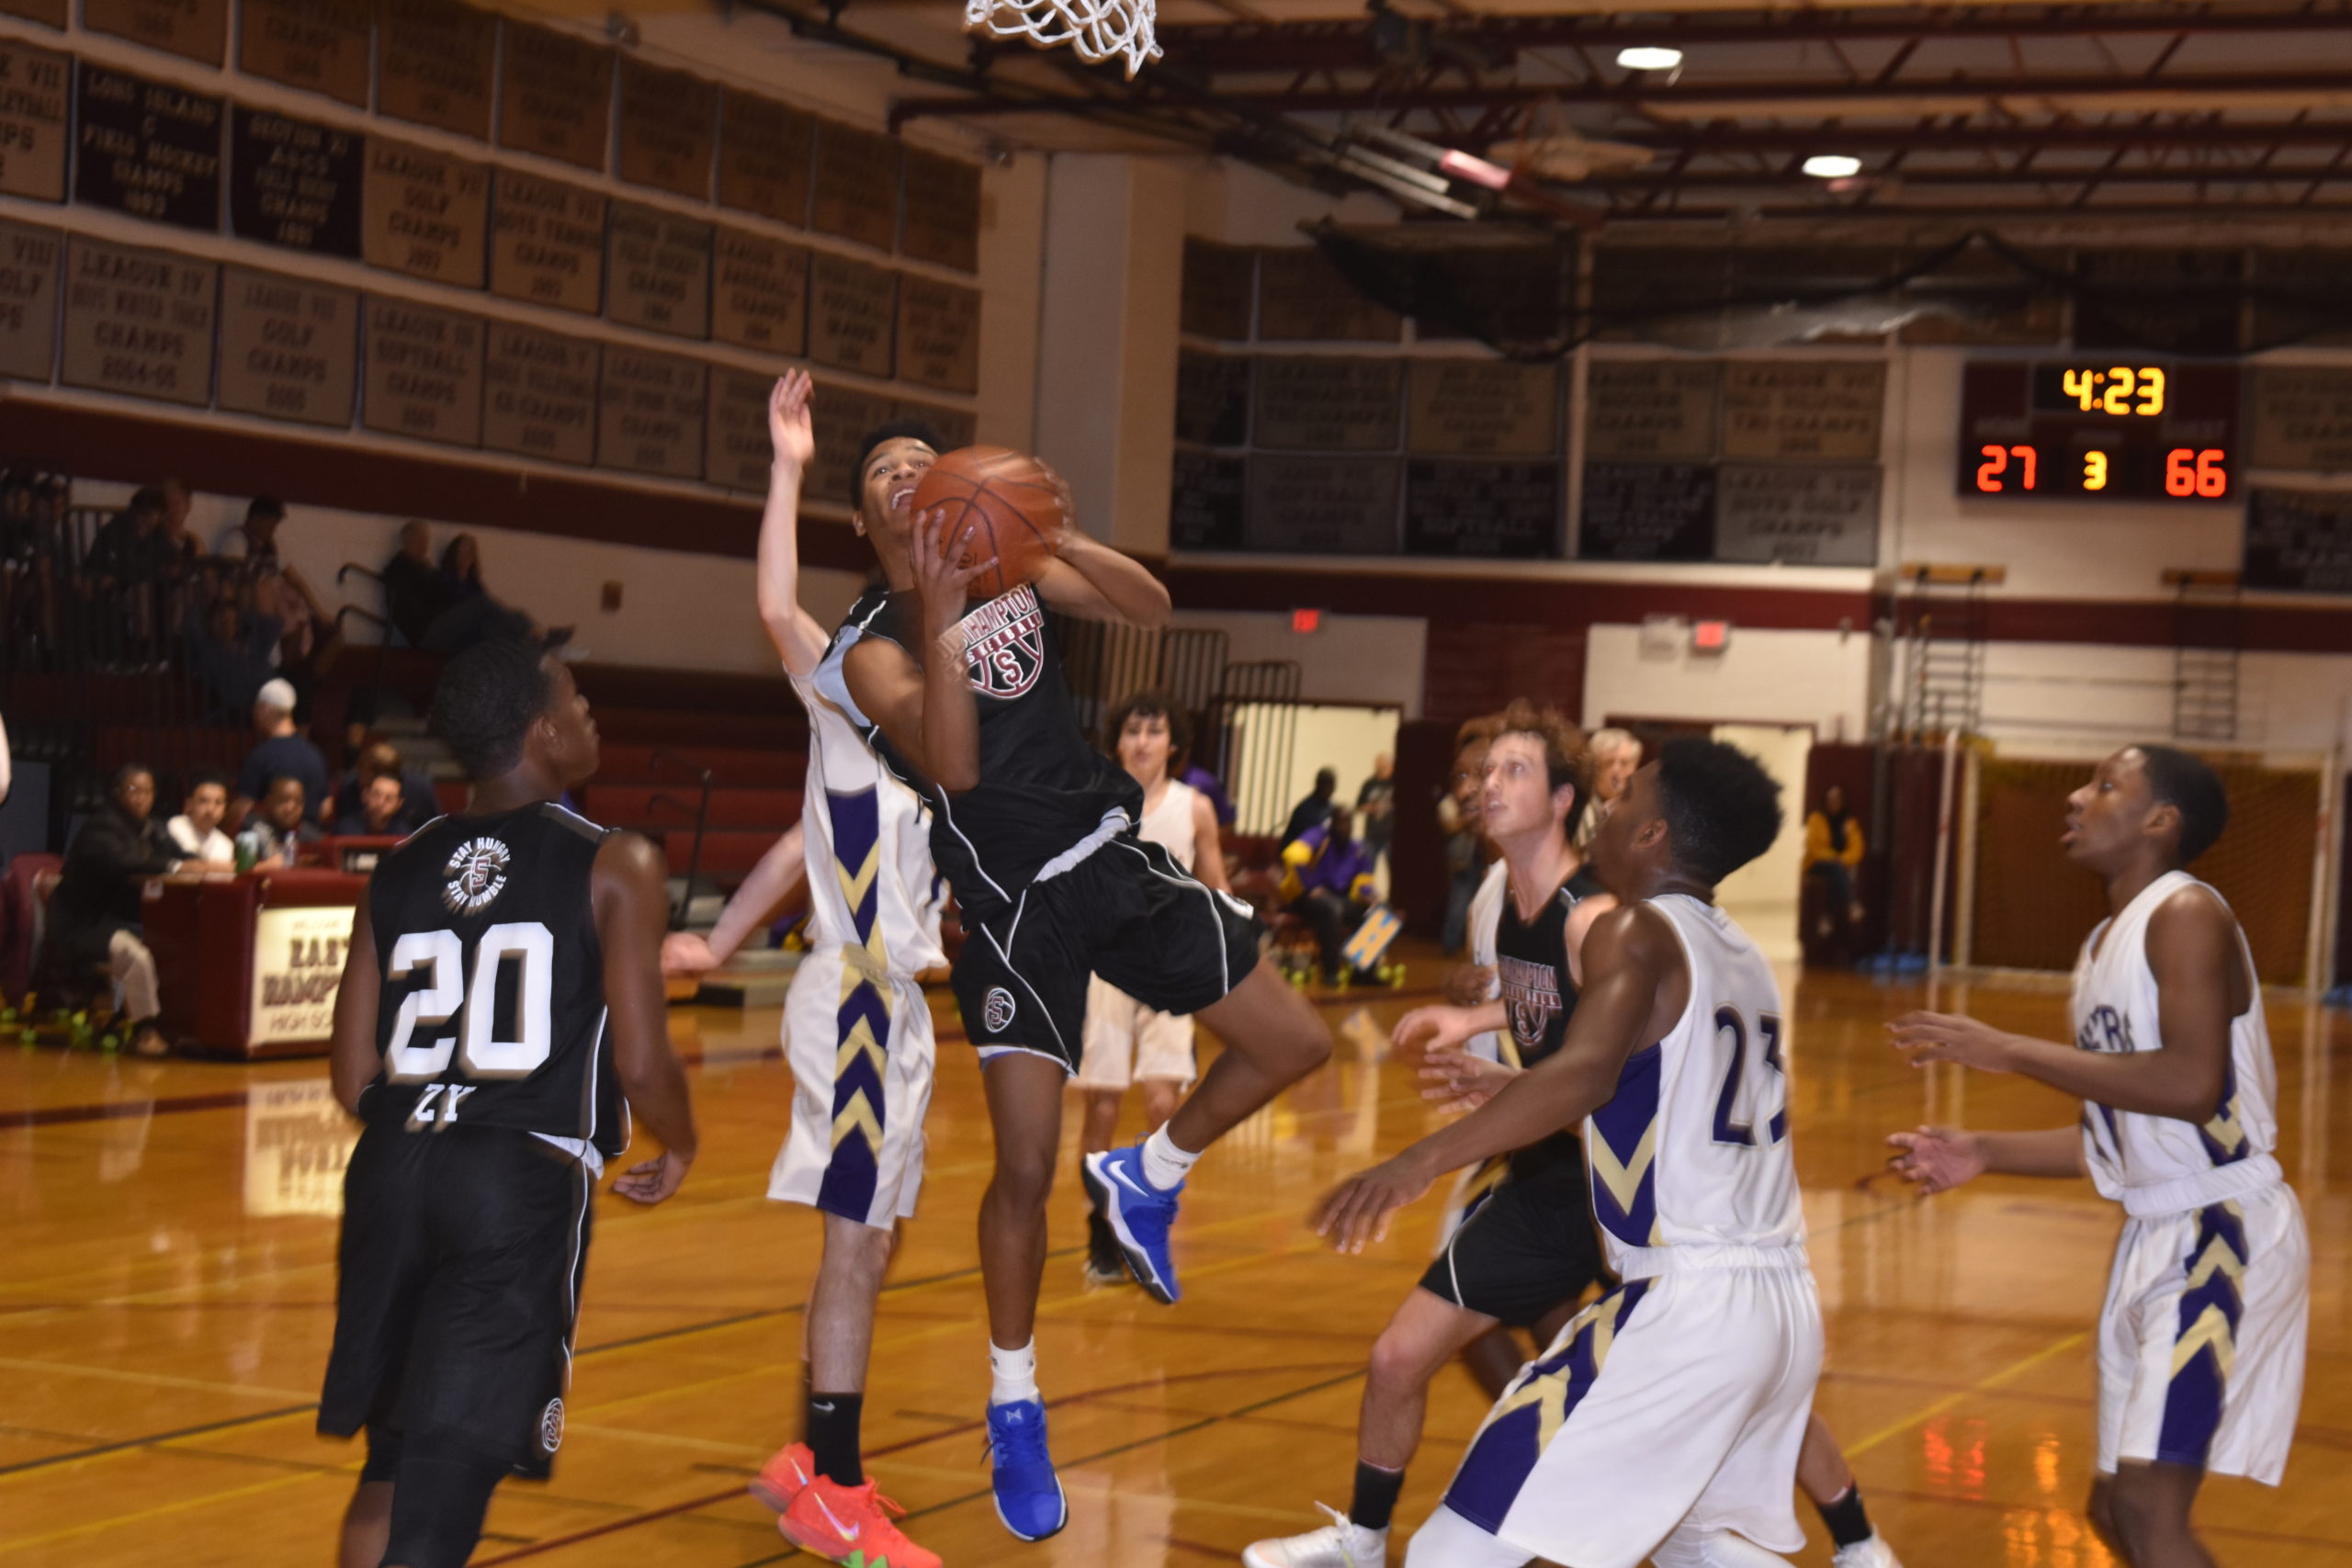 Southampton senior Sincere Faggins weaves his way through traffic and to the basket.